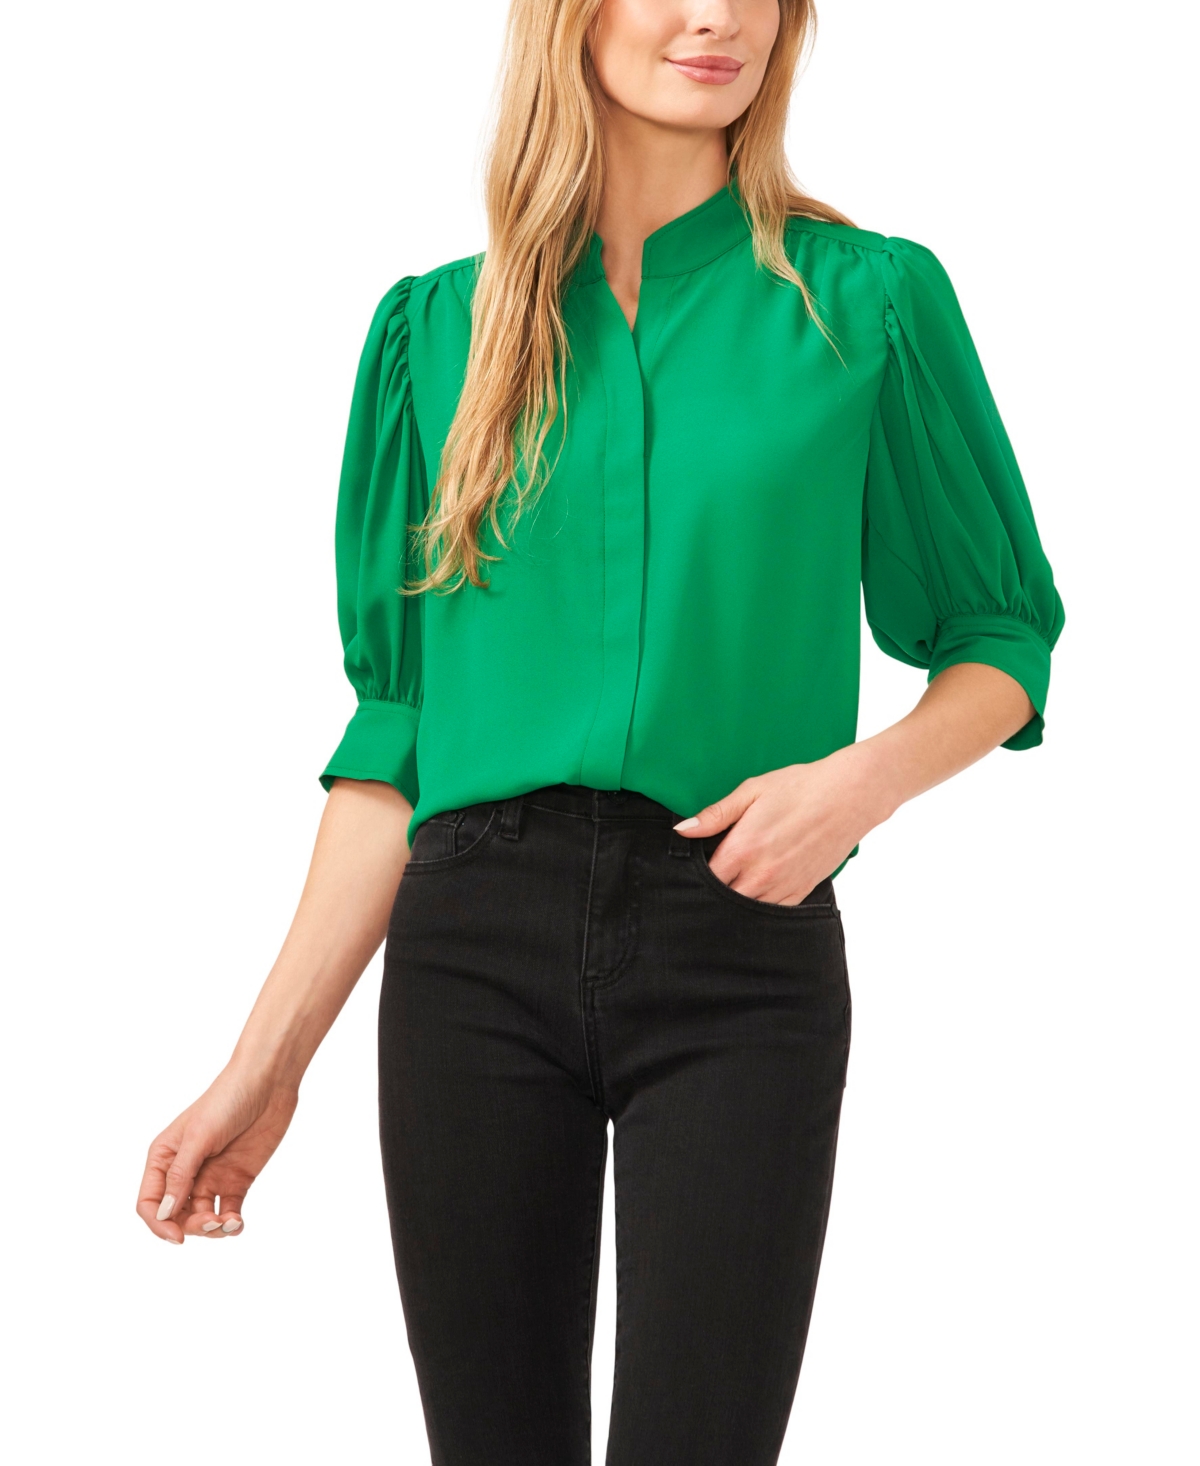 Women's Elbow Sleeve Collared Button Down Blouse - Lush Green